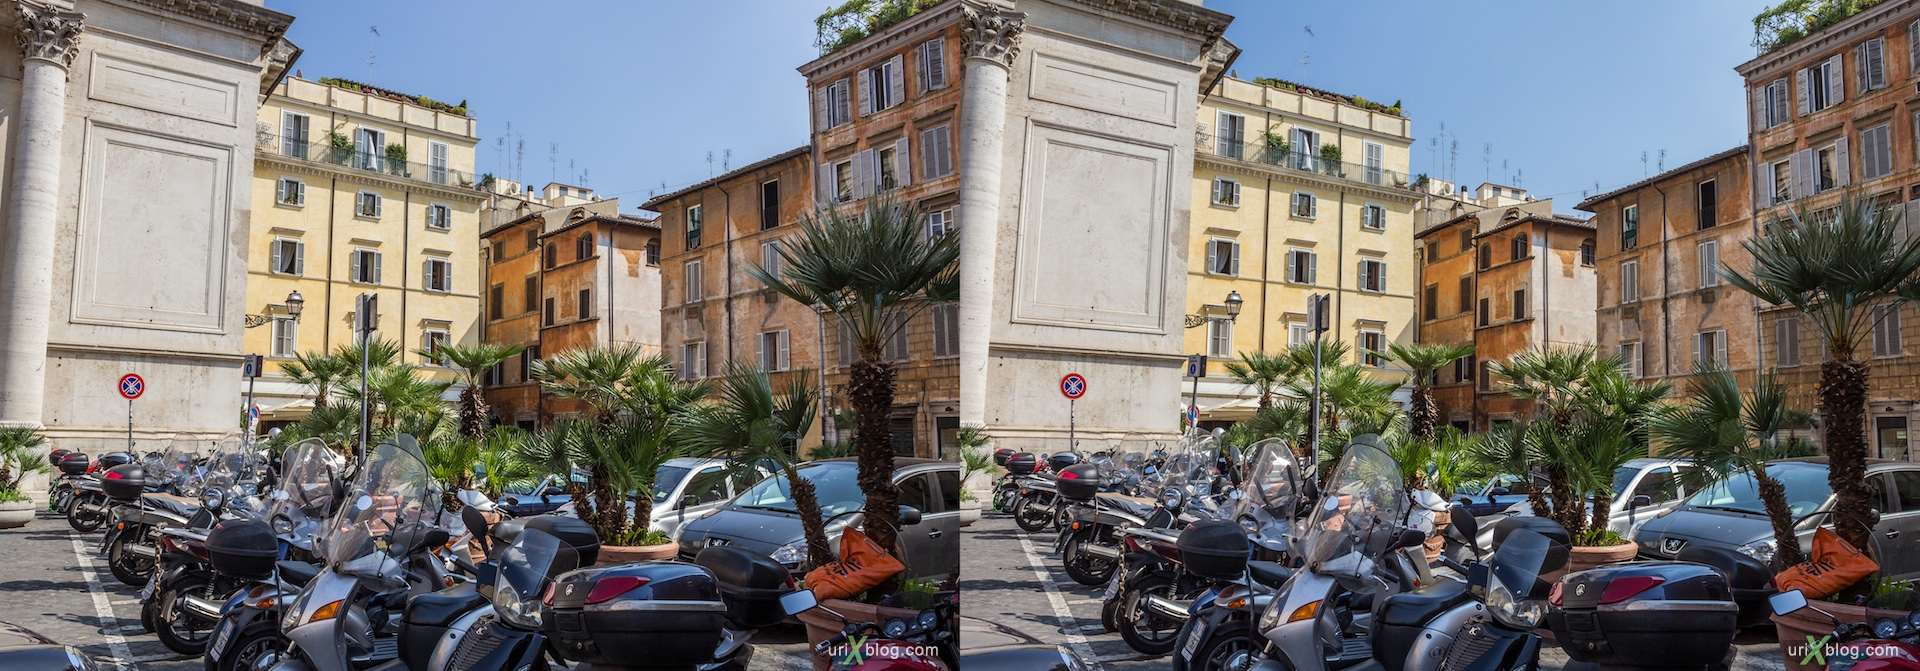 2012, Piazza di San Salvatore in Lauro square, 3D, stereo pair, cross-eyed, crossview, cross view stereo pair